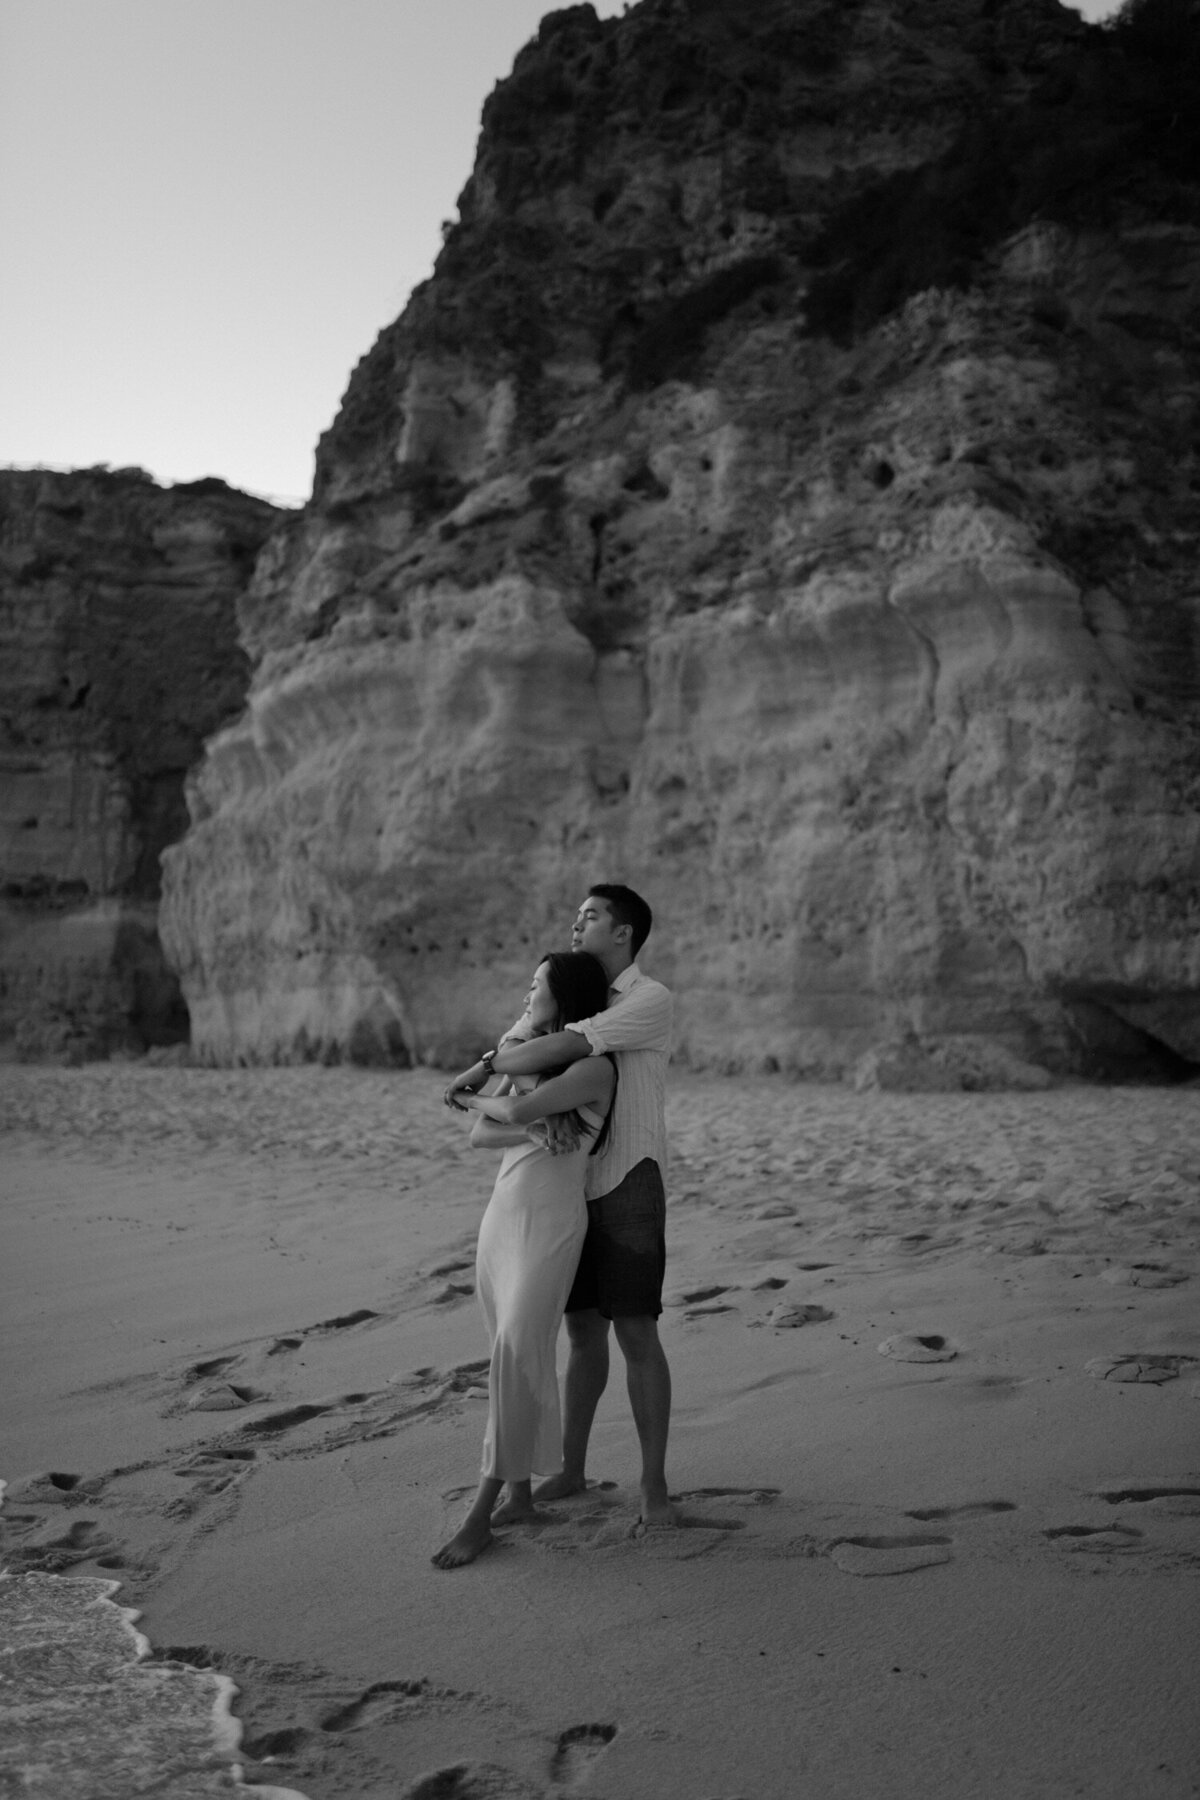 13_Flora_And_Grace_Portugal_Editorial_Wedding_Photographer Lisboa_Wedding_Photographer-260_Natural editorial wedding photographer at the Algarve coast in Portugal. Discover the wedding photography of Flora and Grace.